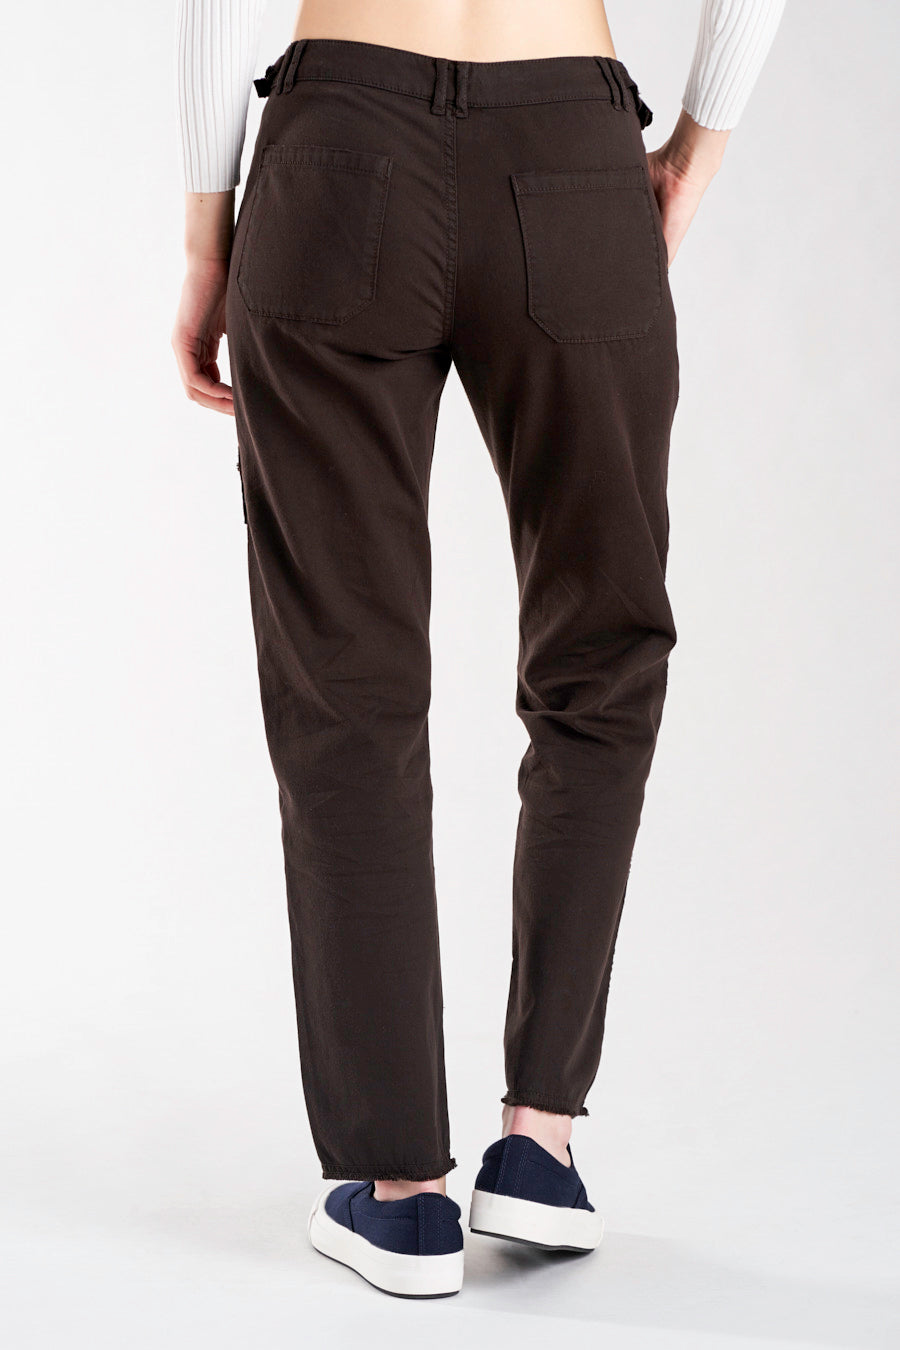 Pants with embroidery in Licorice